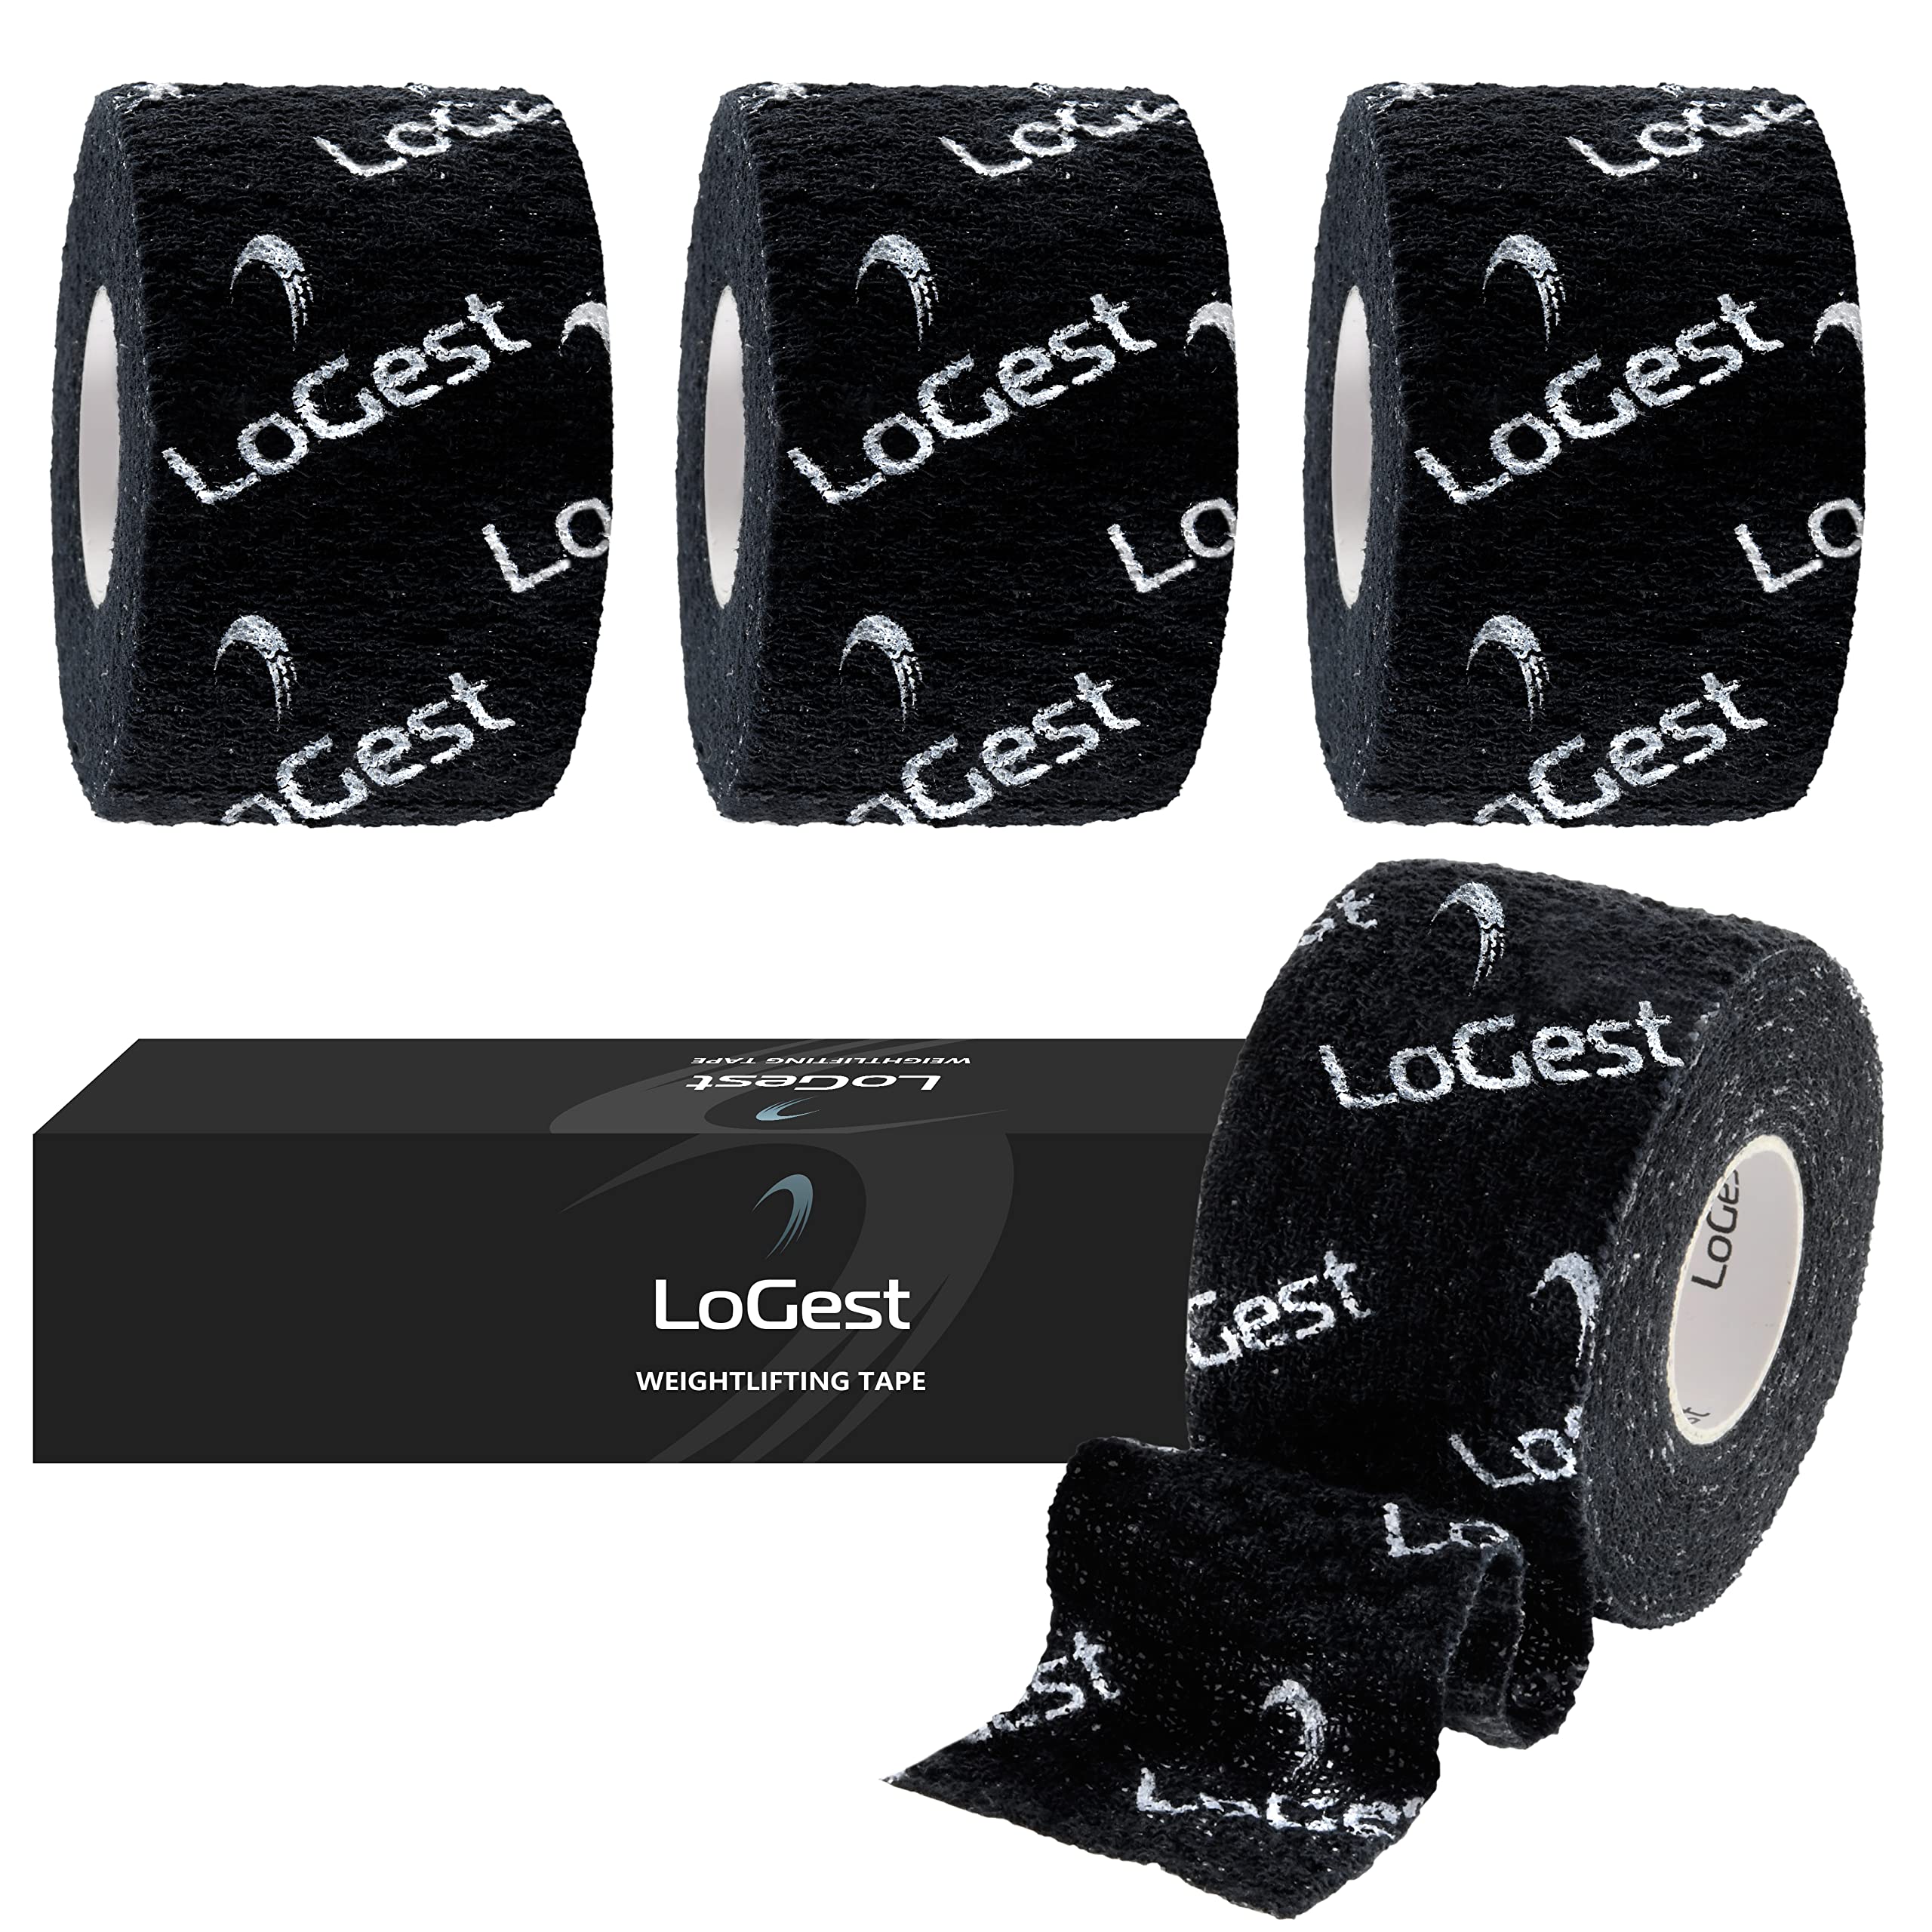 Logest 4 Pack Black or White Weightlifting Tape - Thumb Tape for Wrapping  Fingers Wrists Palms - Grip Tape for Weightlifting Deadlifting Rock  Climbing Crossfit Equipment Goat Tape 4 ROLLS Black 1.5-Inch